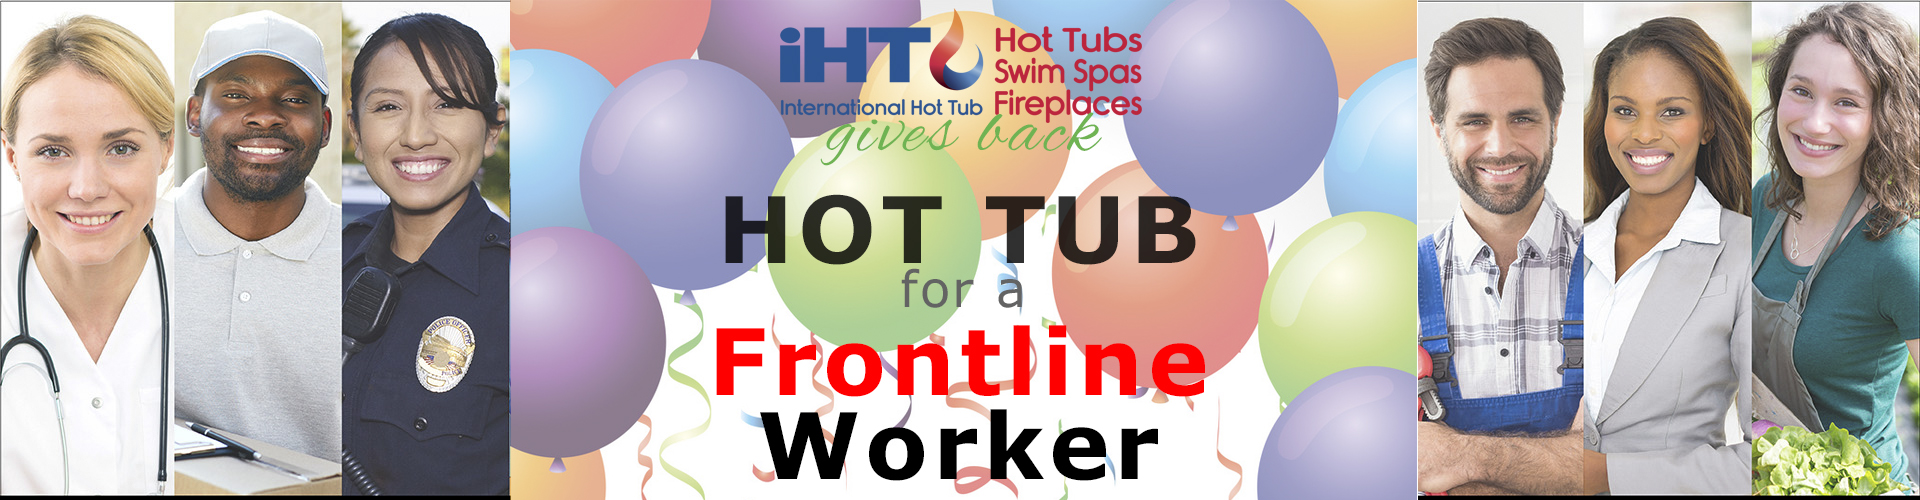 Hot tub giveaway to Frontline Workders results